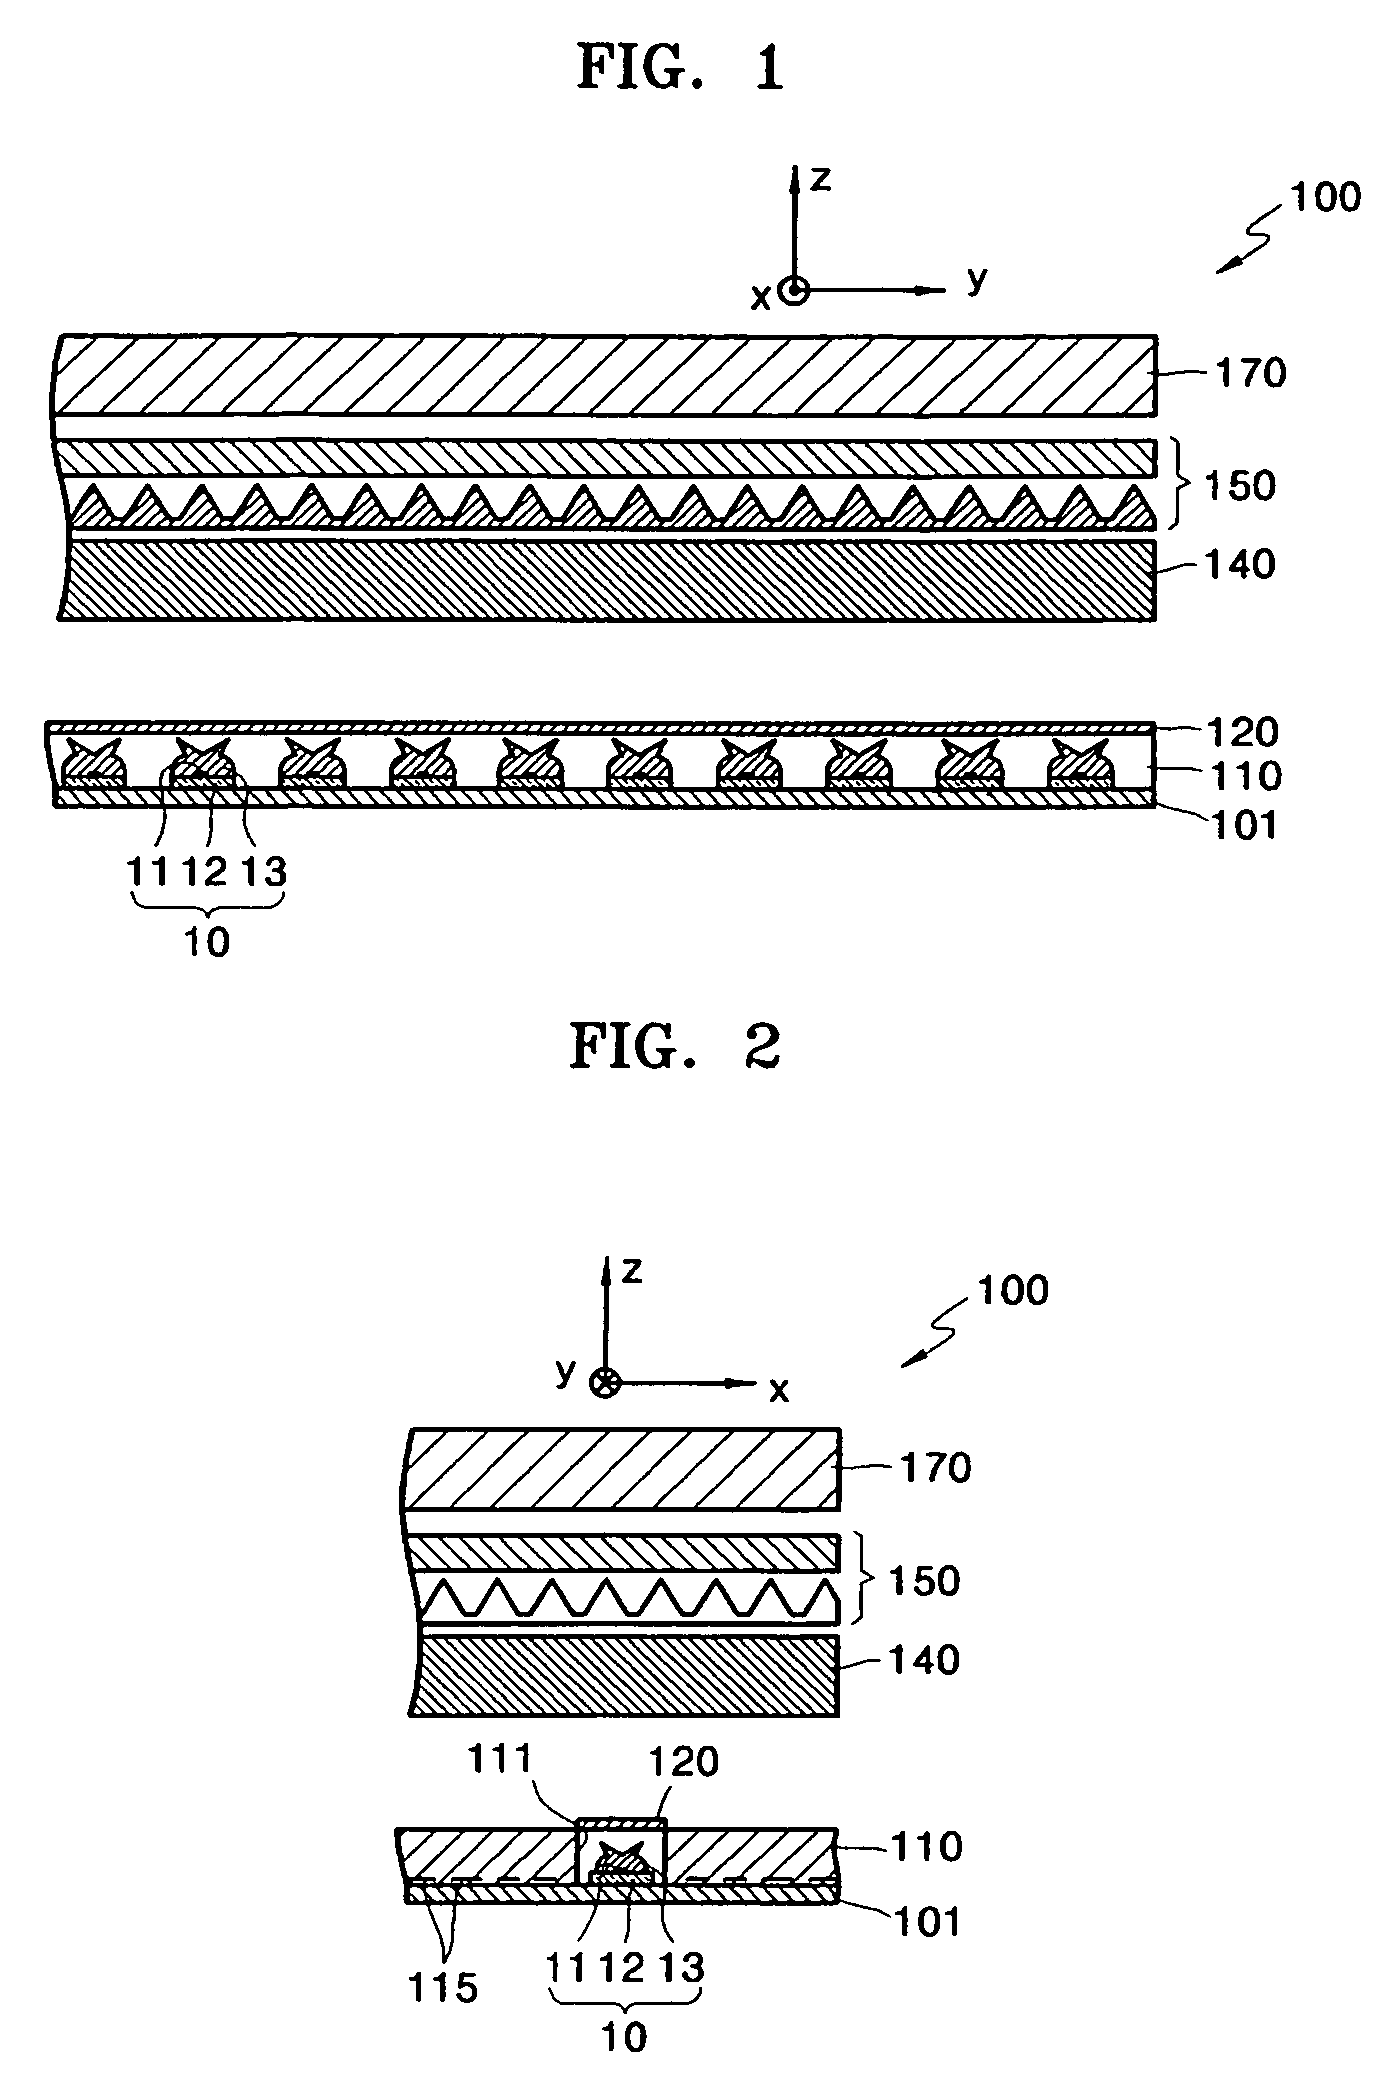 LCD backlight system using light emitting diode chip